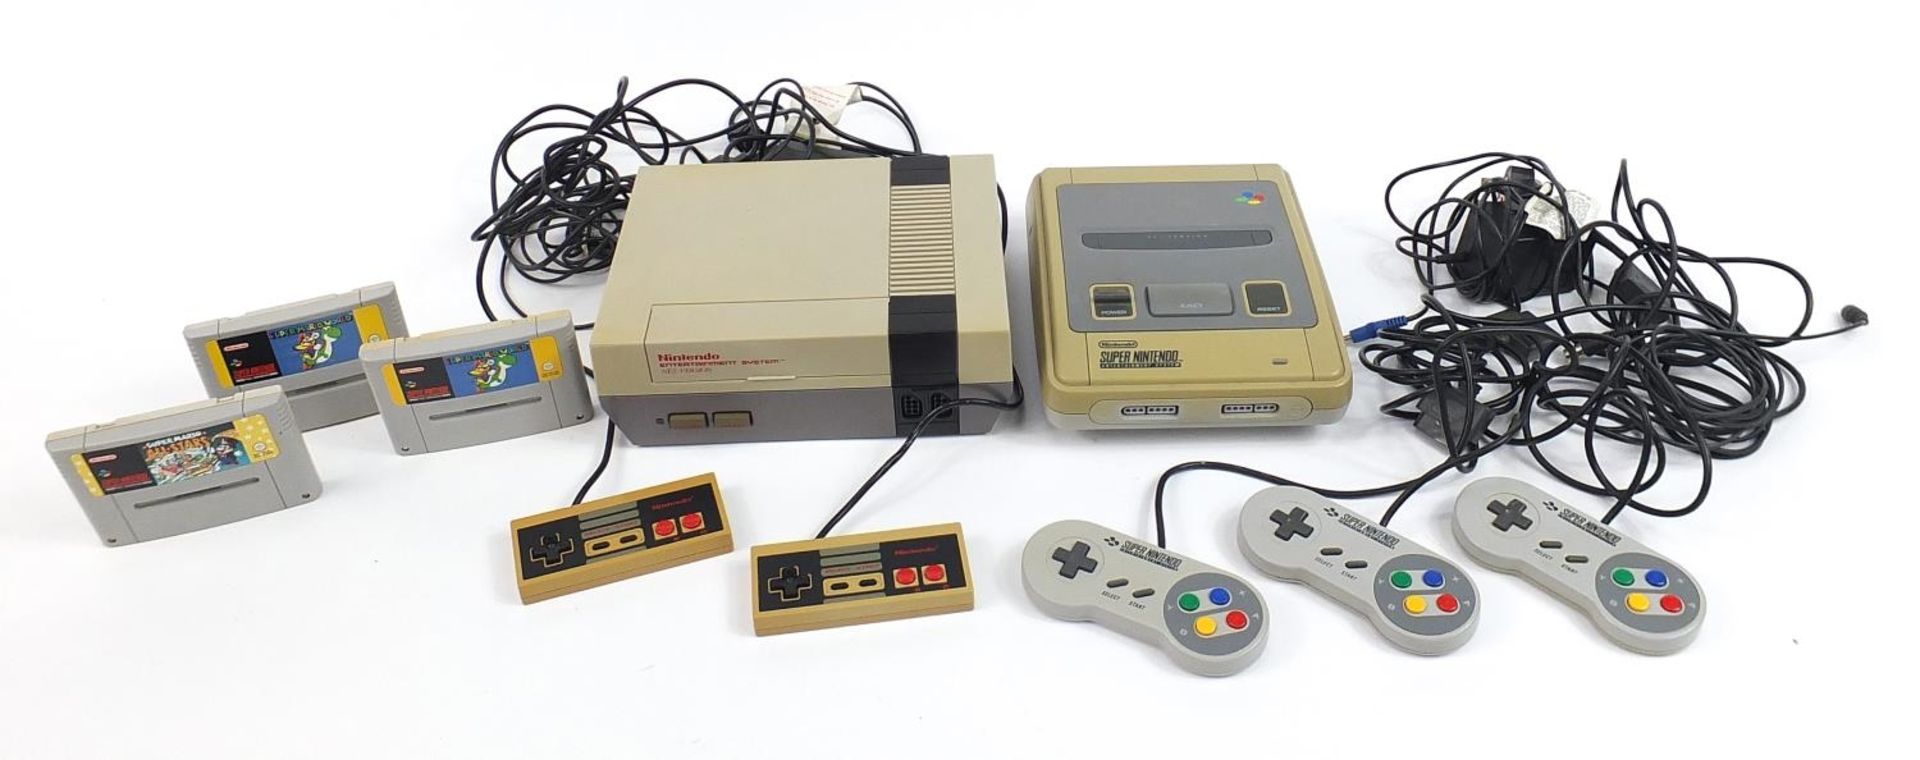 Vintage Nintendo NES games console with controllers and Super Nintendo games console with